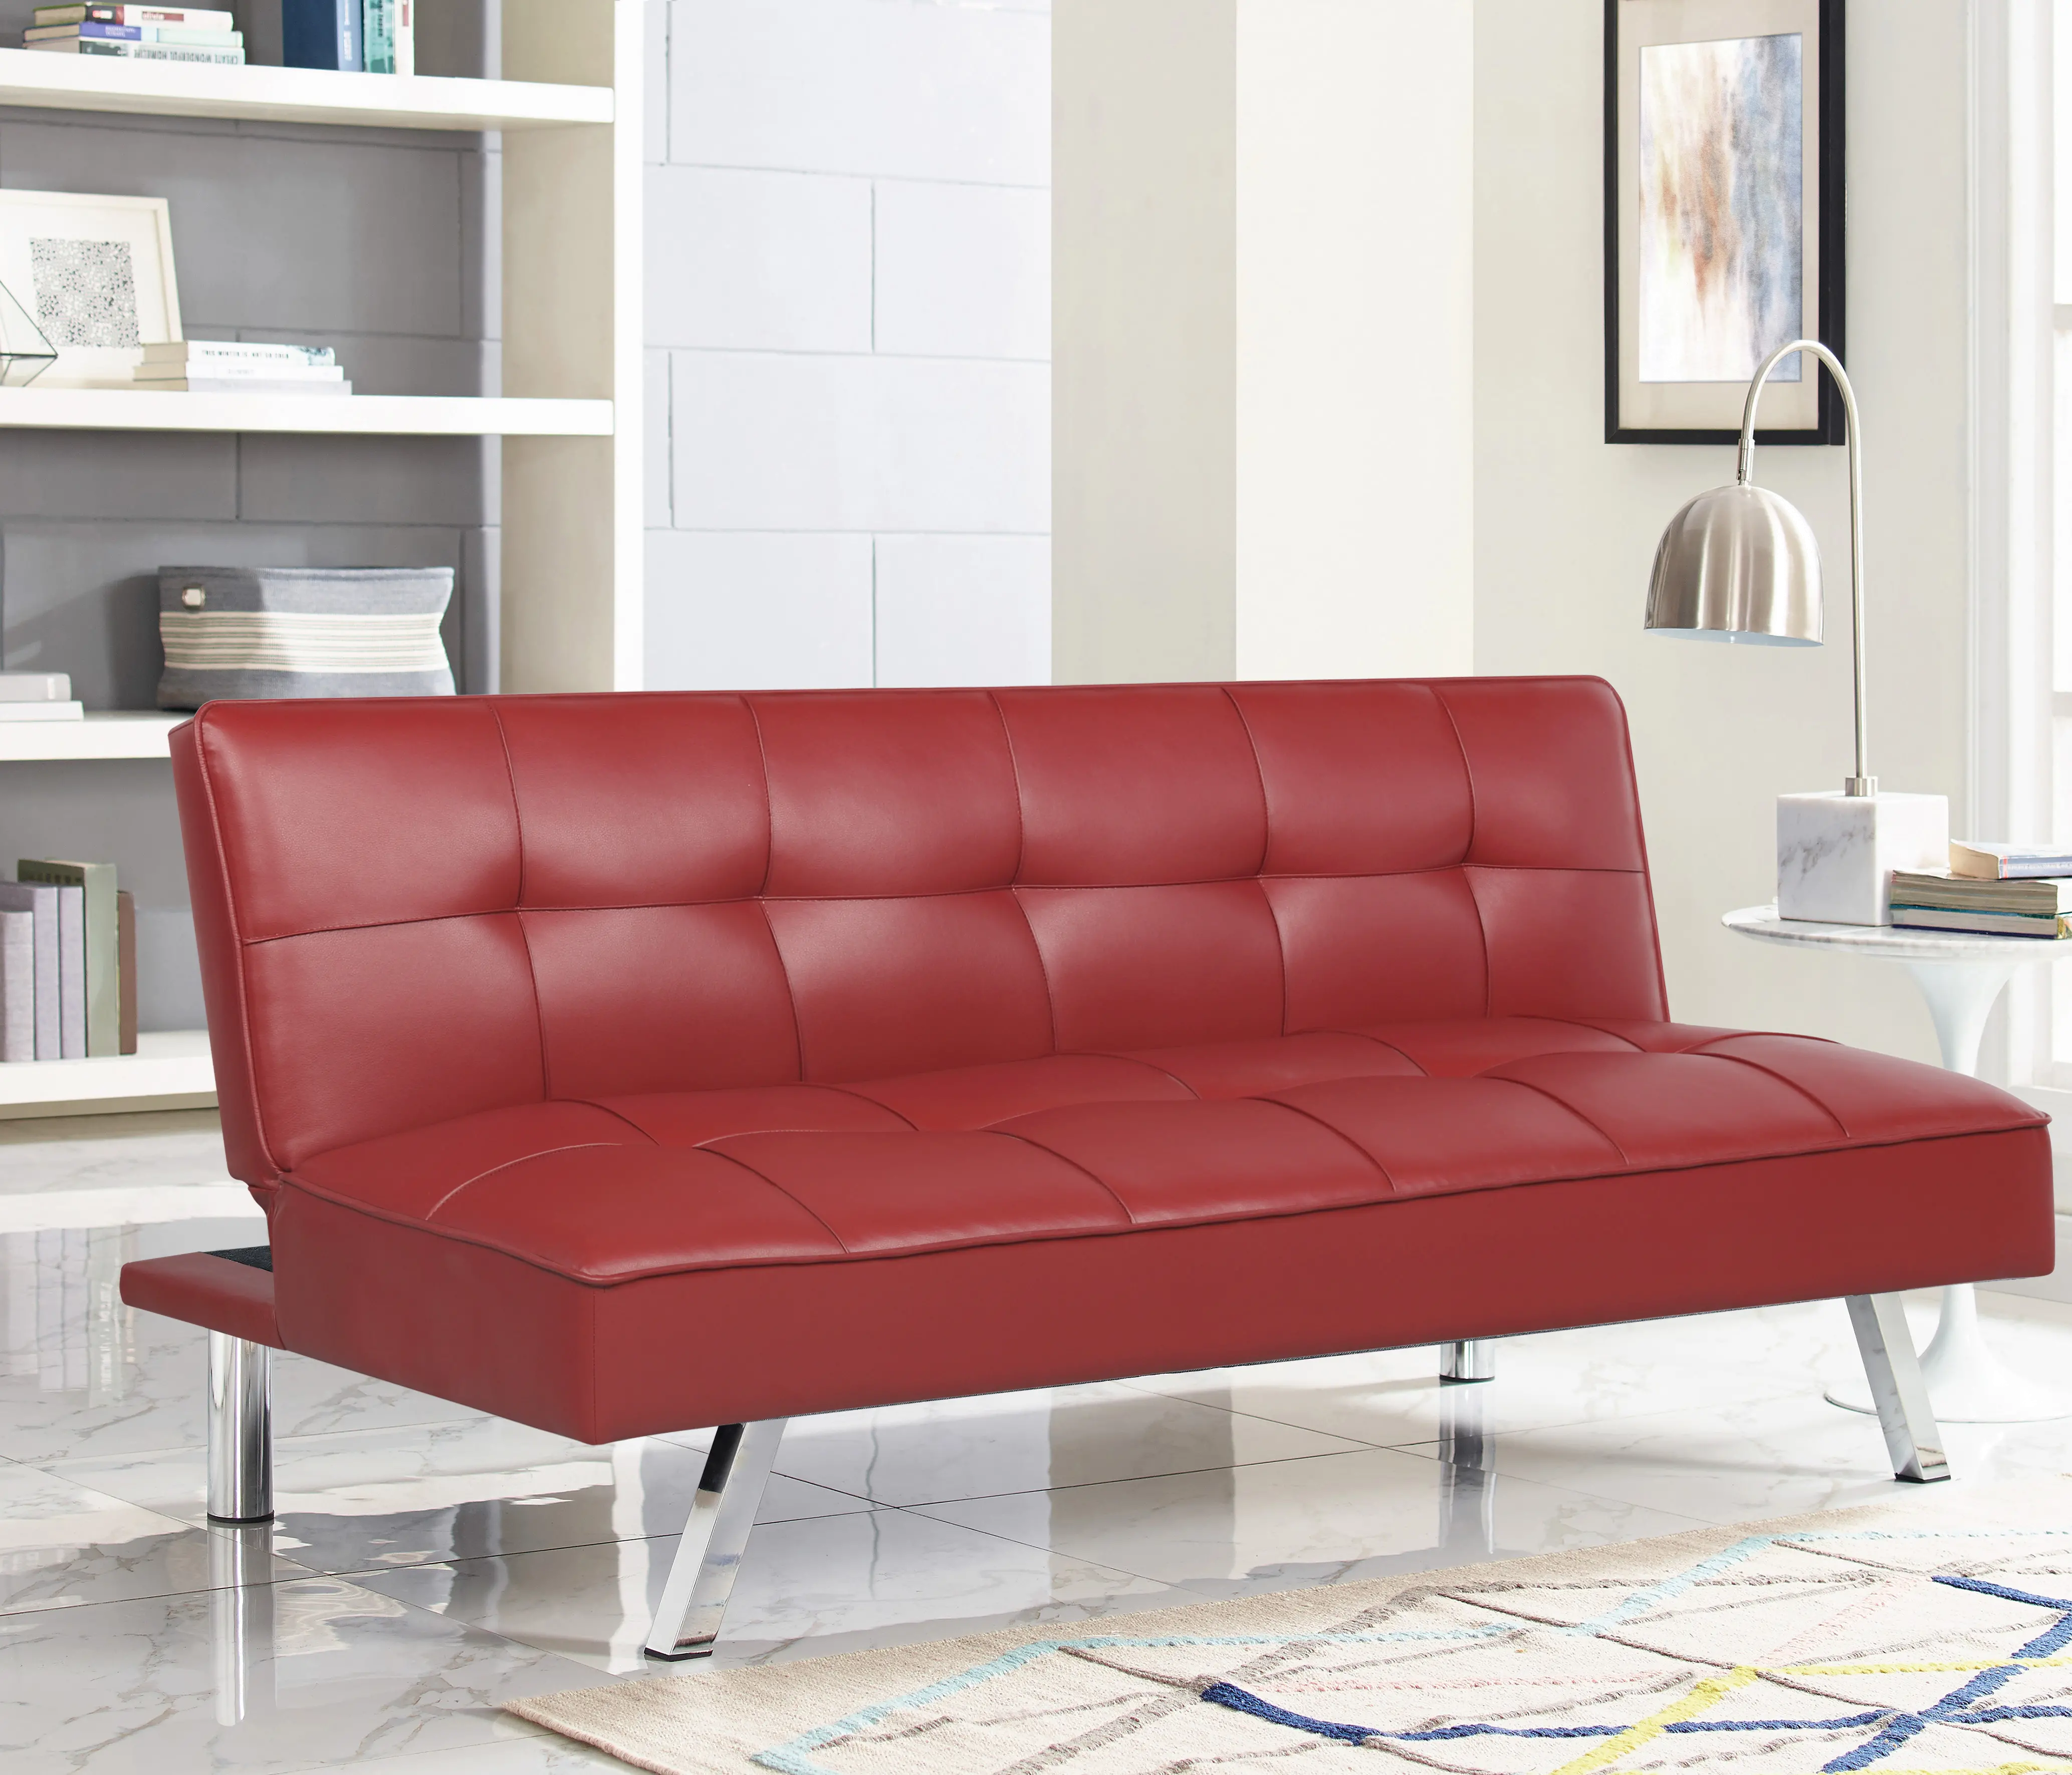 SC-CRYS3LP2028 Mia Red Multi-Functional Sofa Lounger Sleeper by S sku SC-CRYS3LP2028